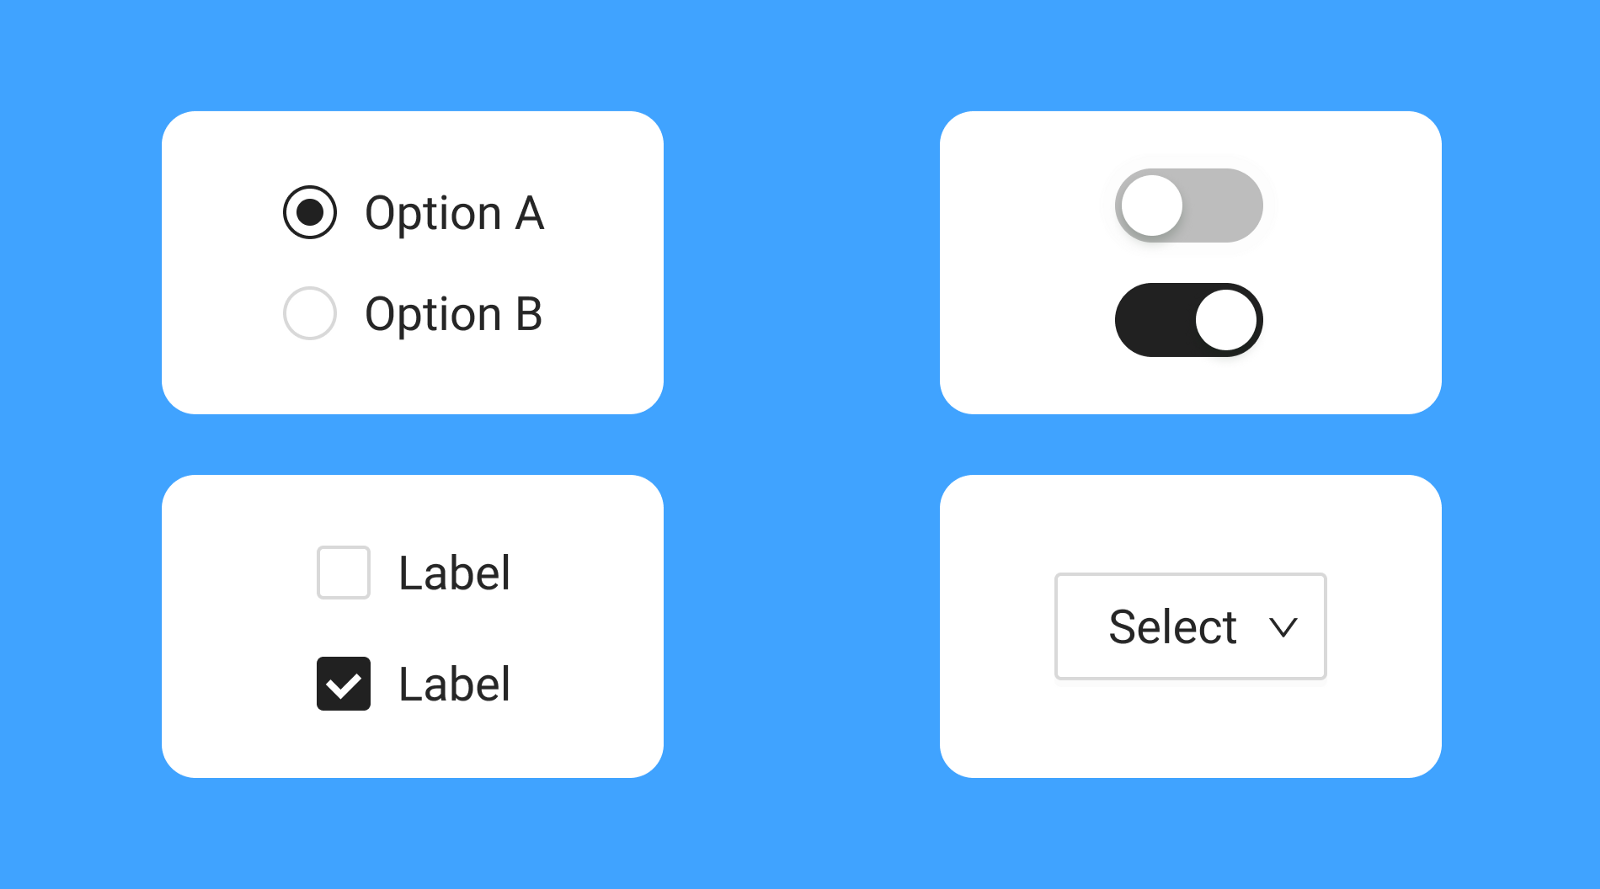 Radio buttons, checkboxes, toggle switches, and dropdown lists: design tips for using selection controls